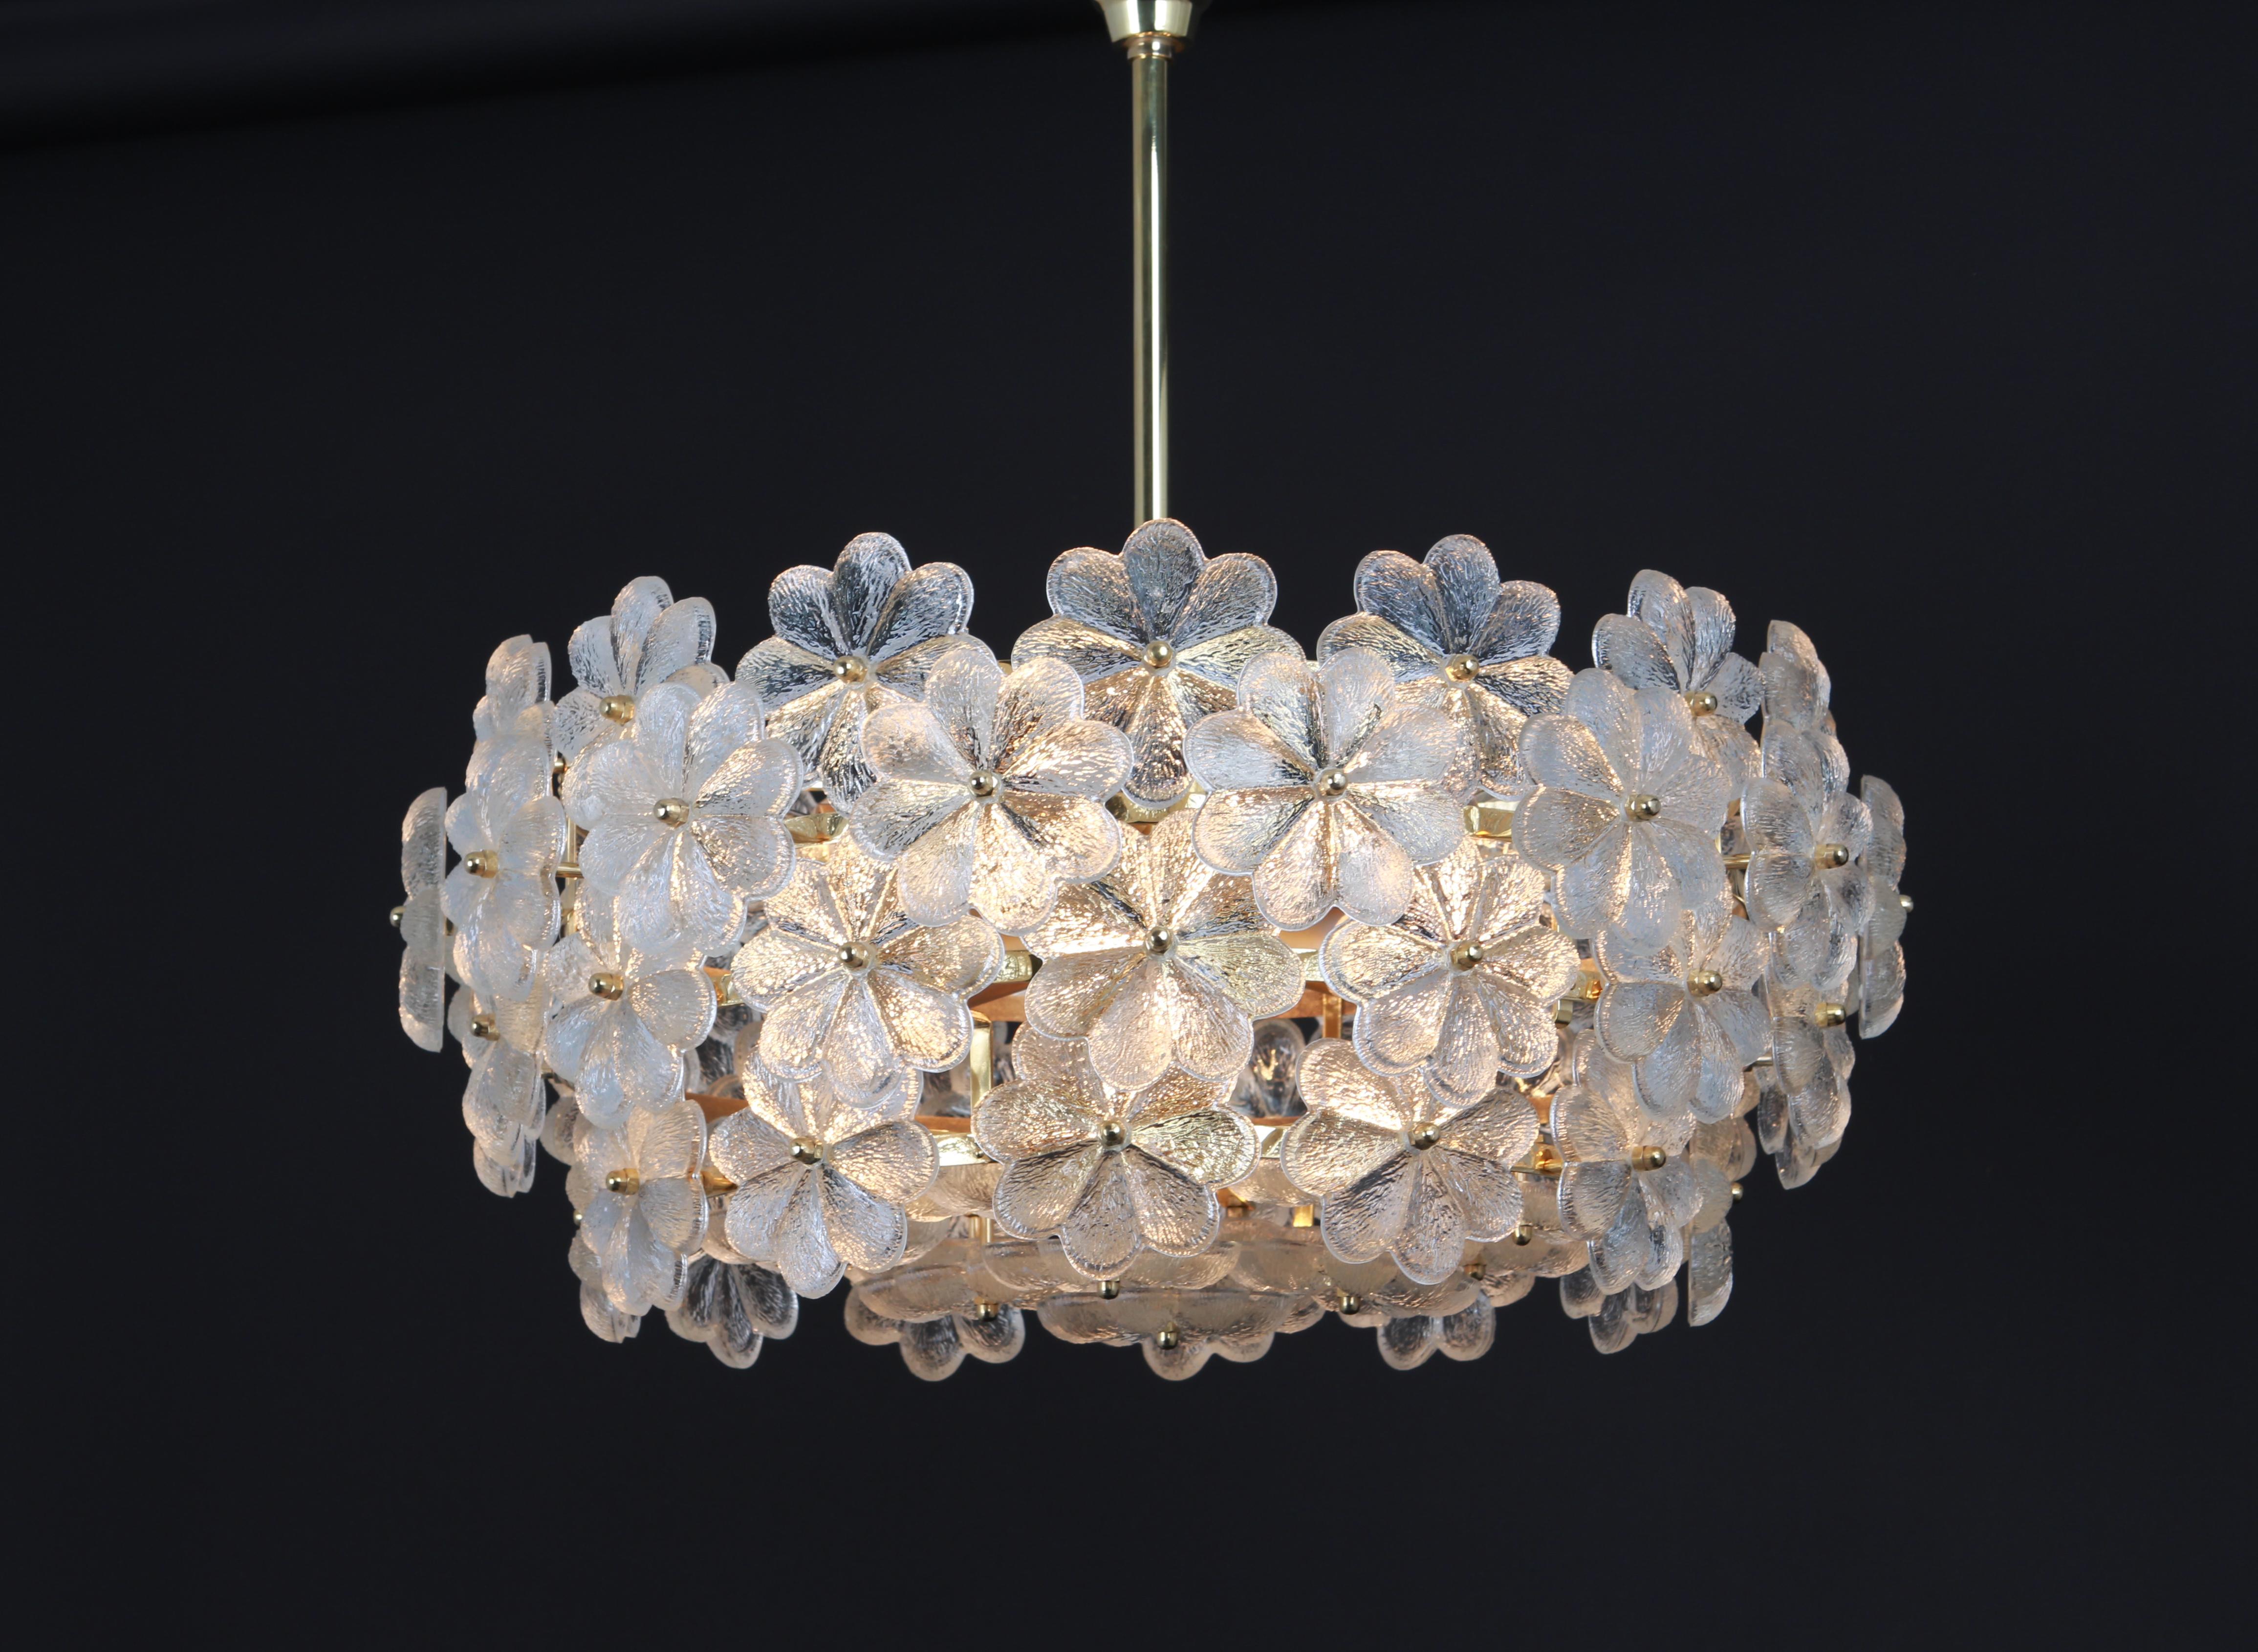 1 of 2 Stunning Murano Glass Chandelier by Ernst Palme, Germany, 1970s For Sale 4